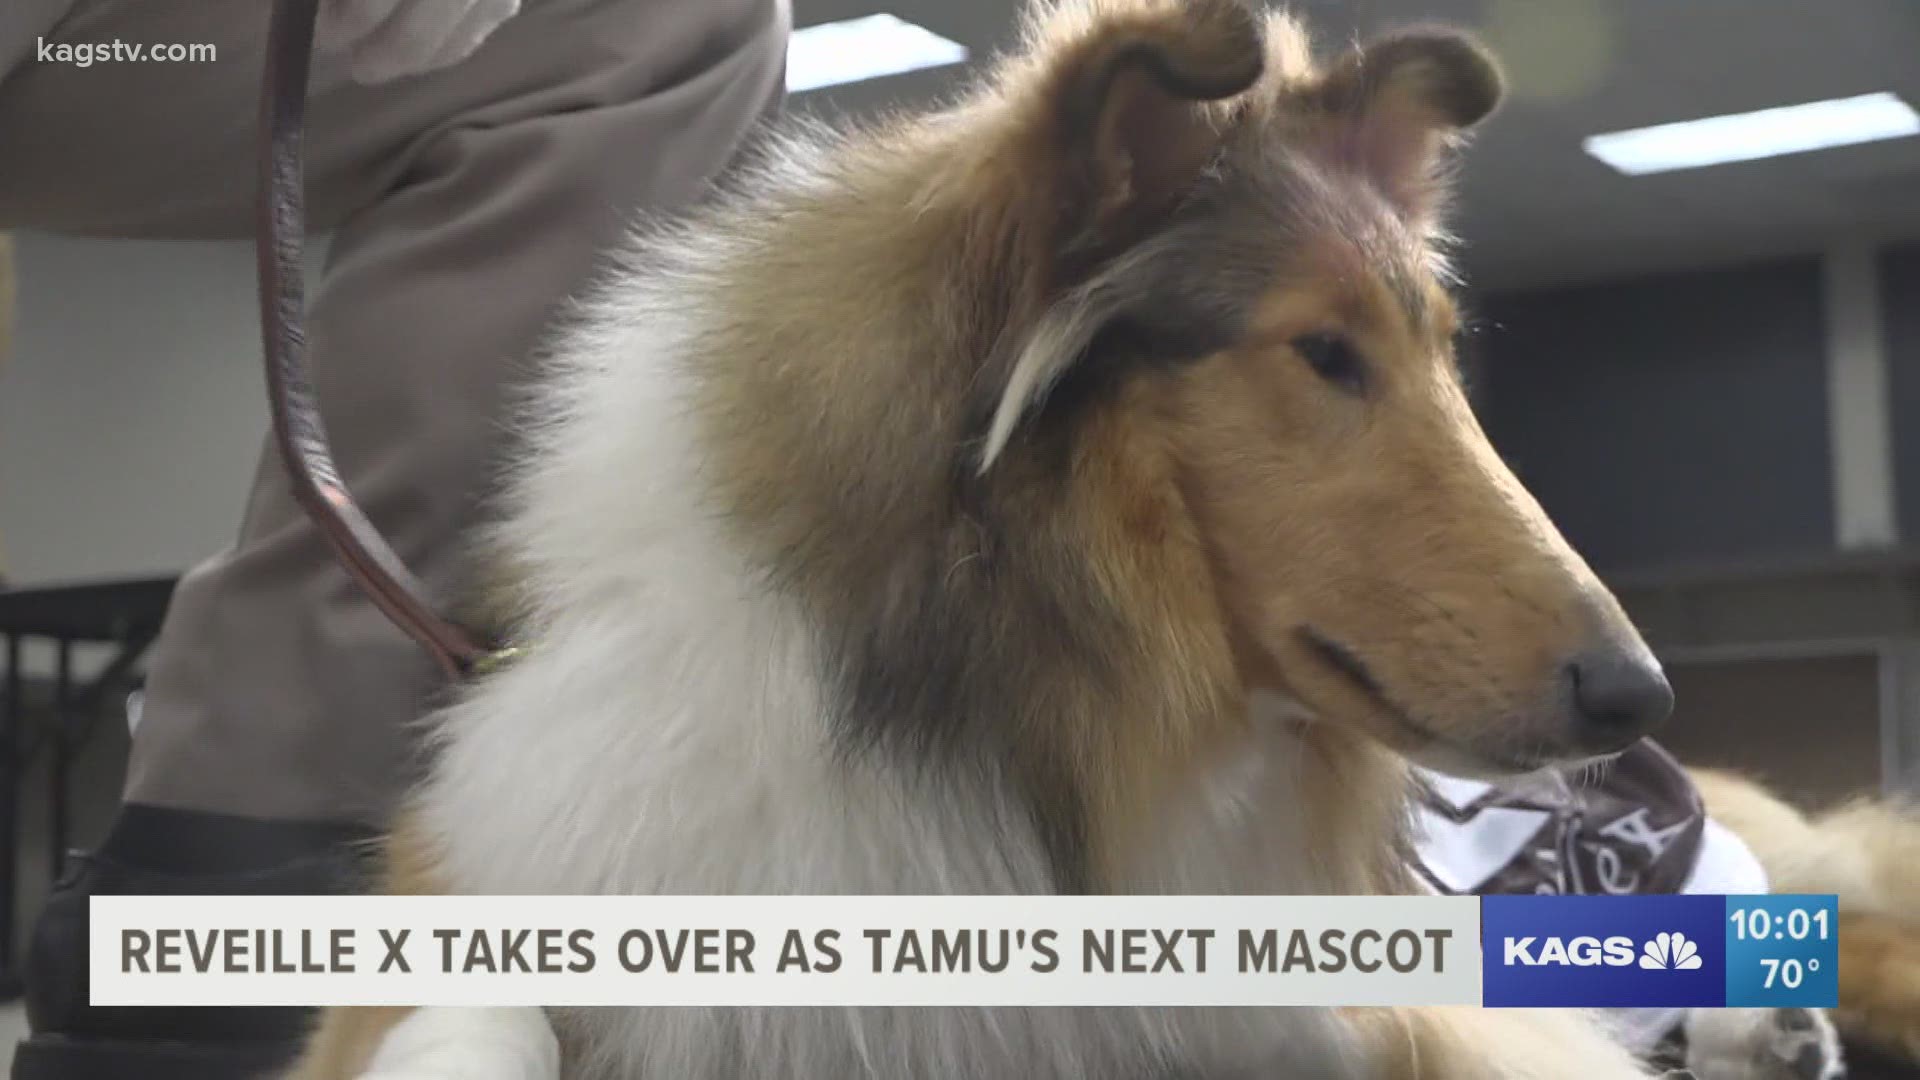 Reveille X has officially been ushered into a new era as Texas A&M university's next mascot.